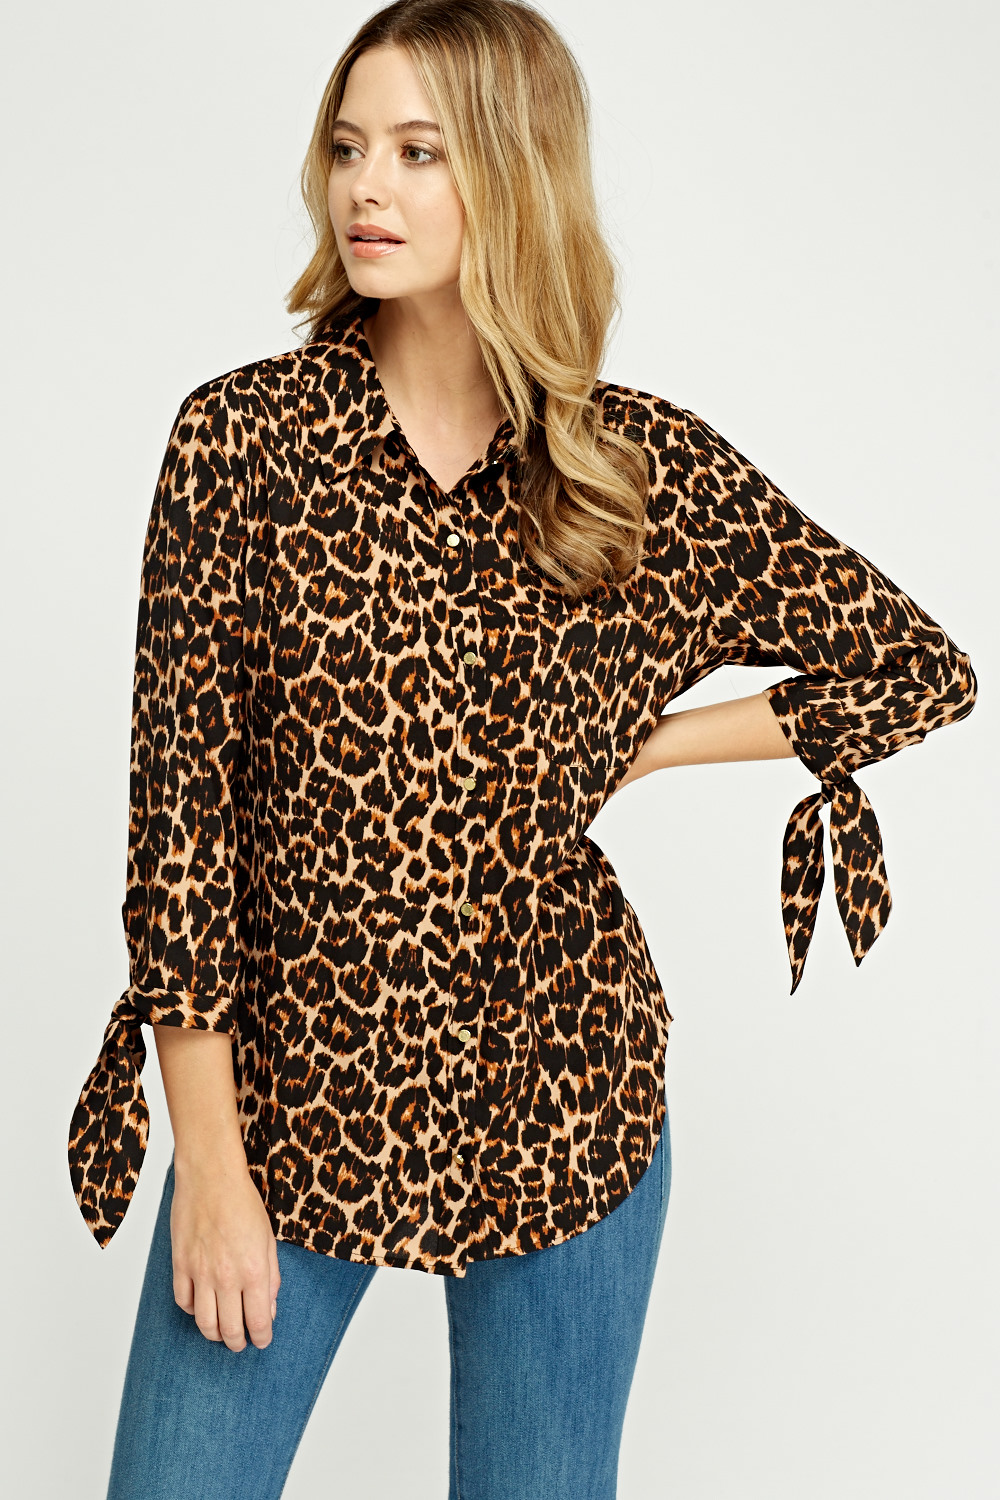 Juicy Couture Leopard Print Blouse - Limited edition | Discount ...